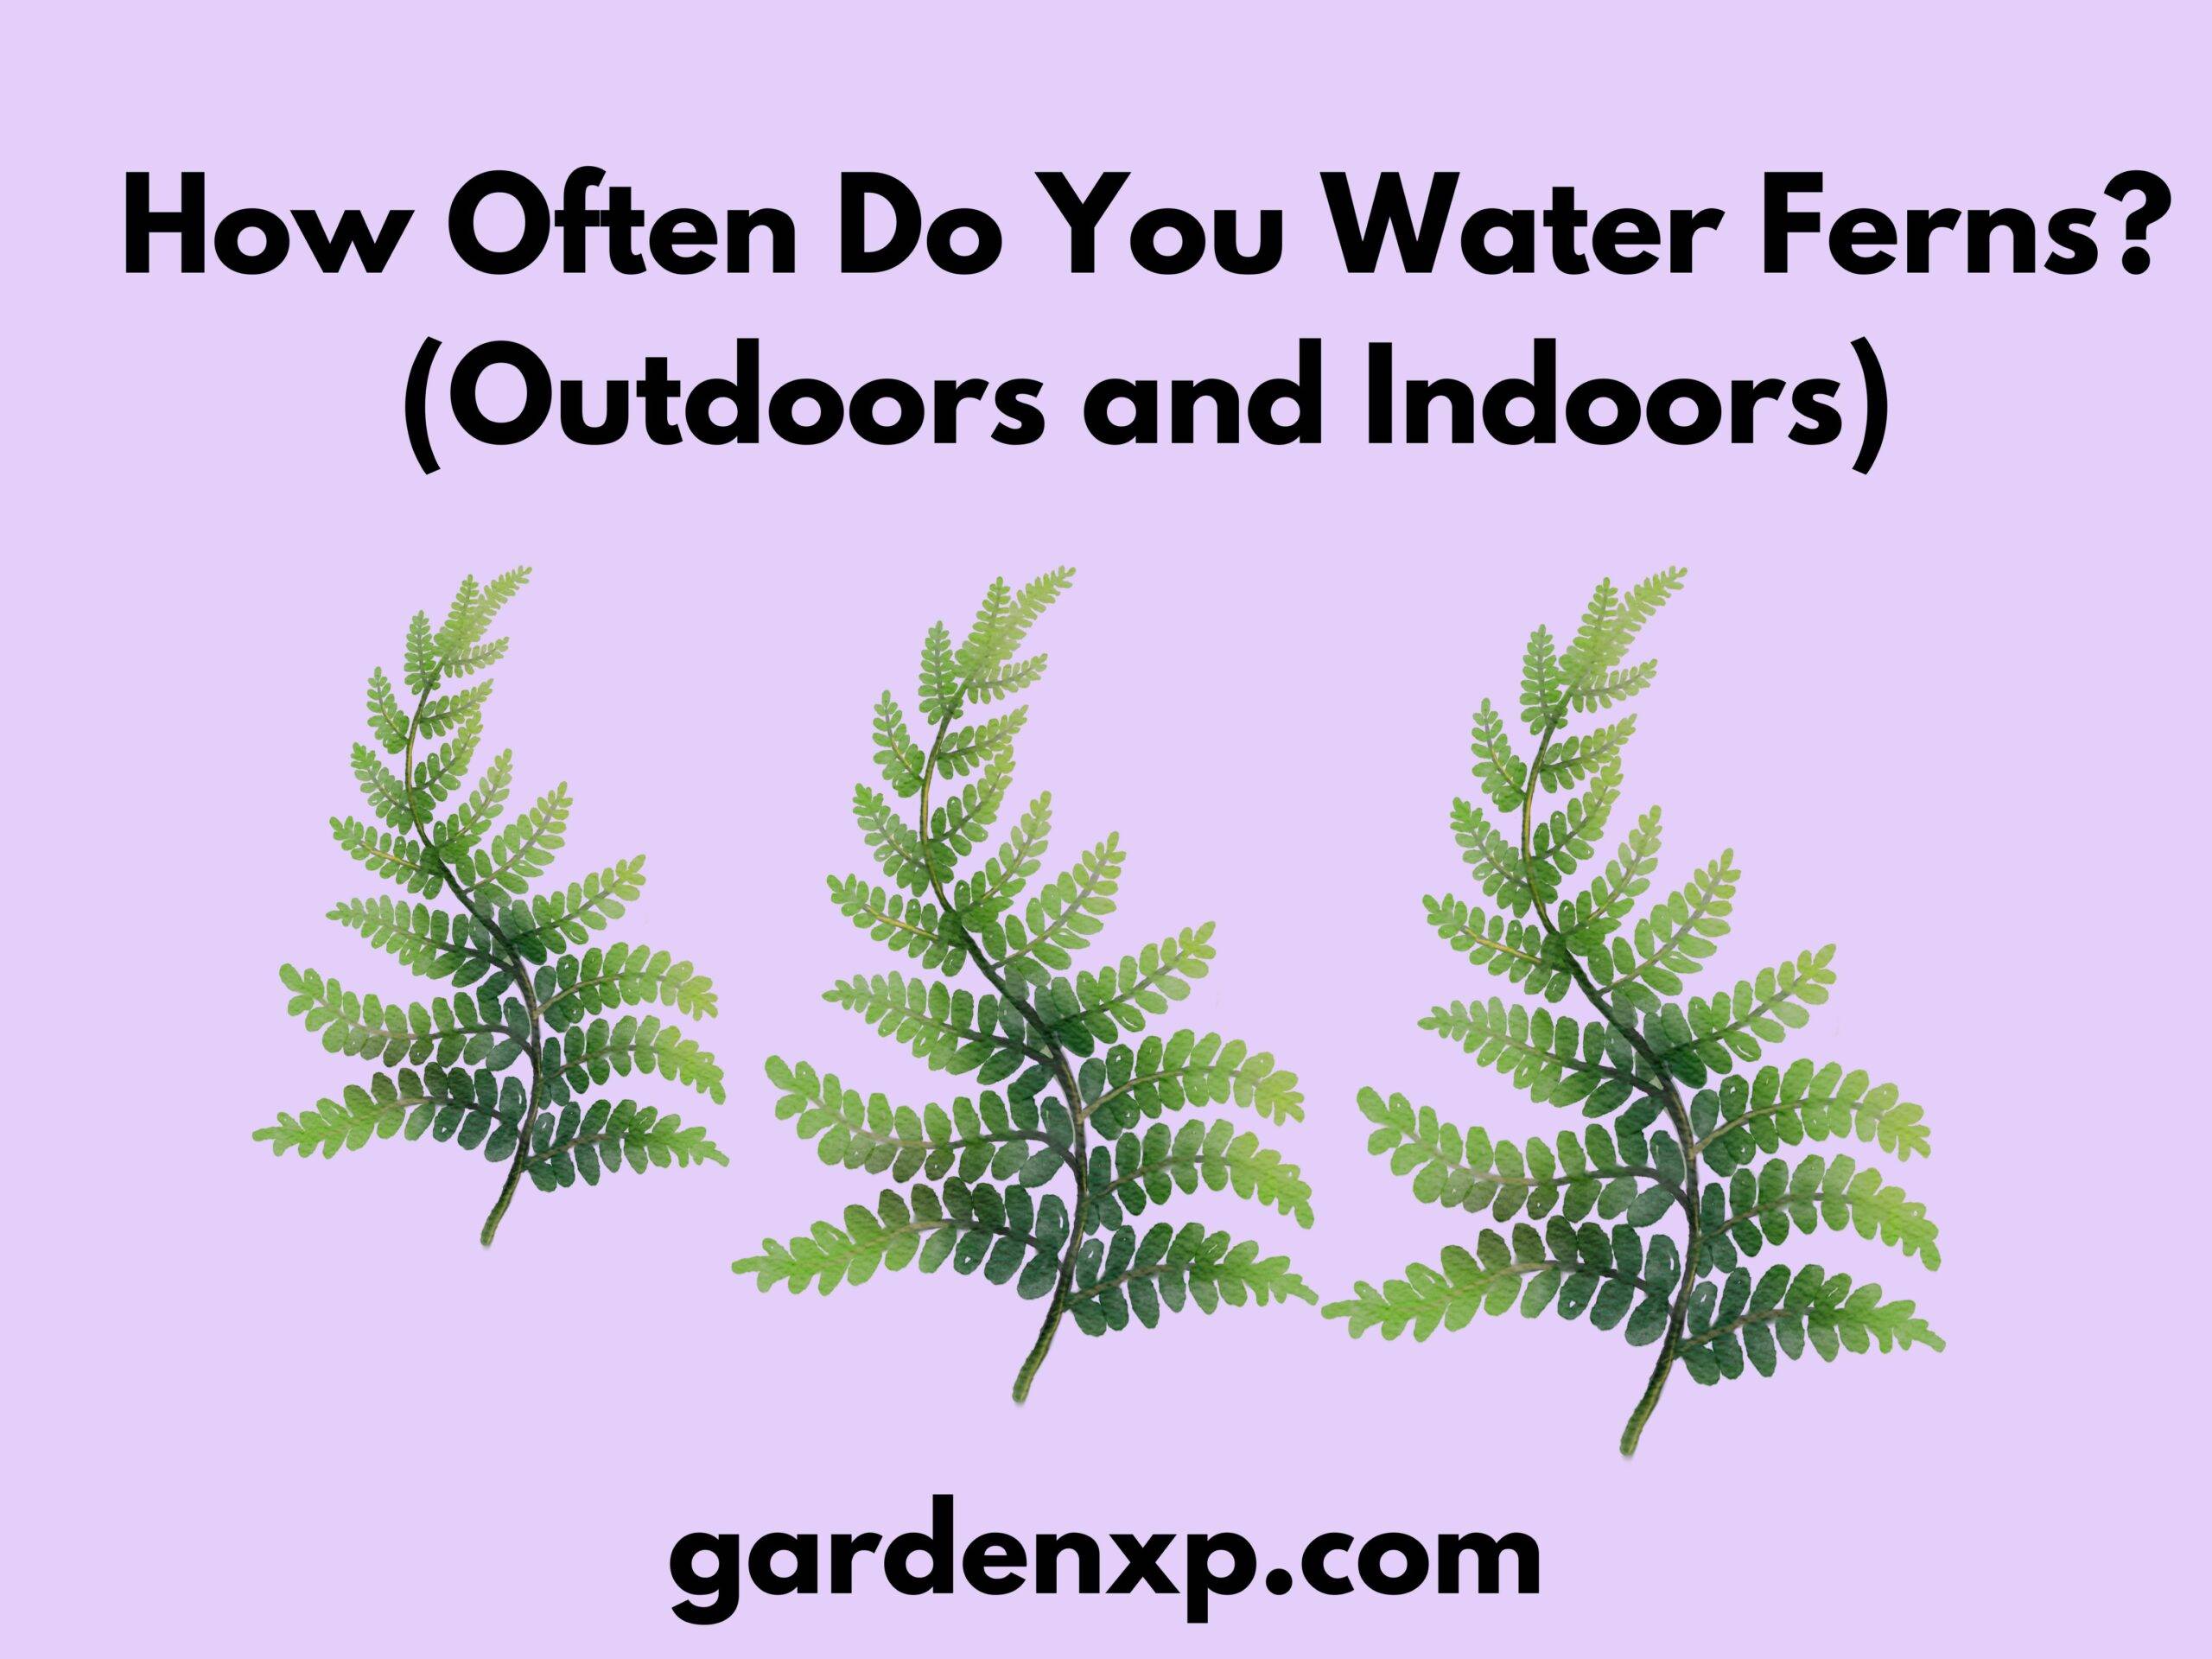 How Often Do You Water Ferns? (Indoors & Outdoors)